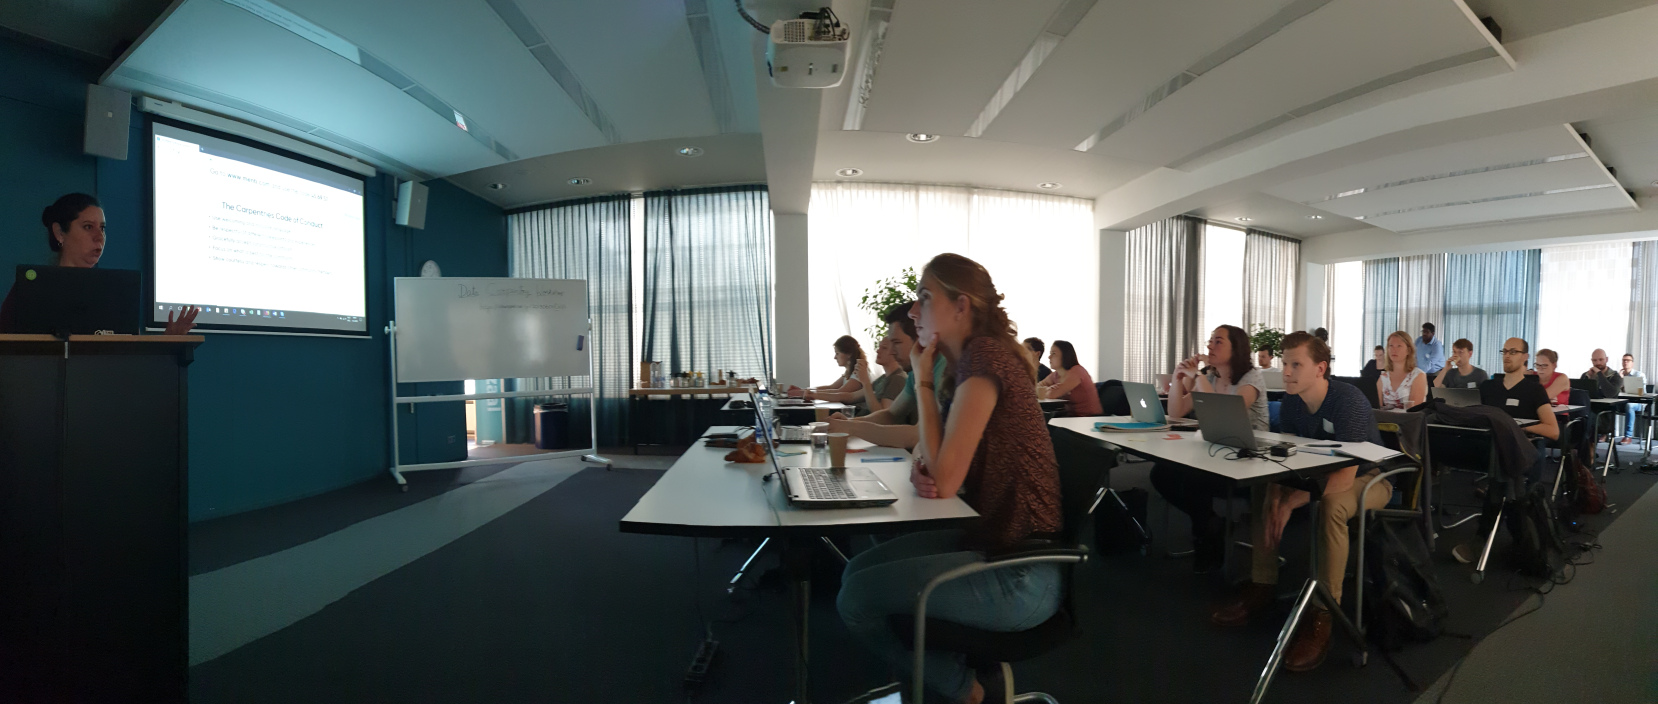 Researchers attend TU Delft’s first Genomics Carpentry to ‘shape up’ their data science skills